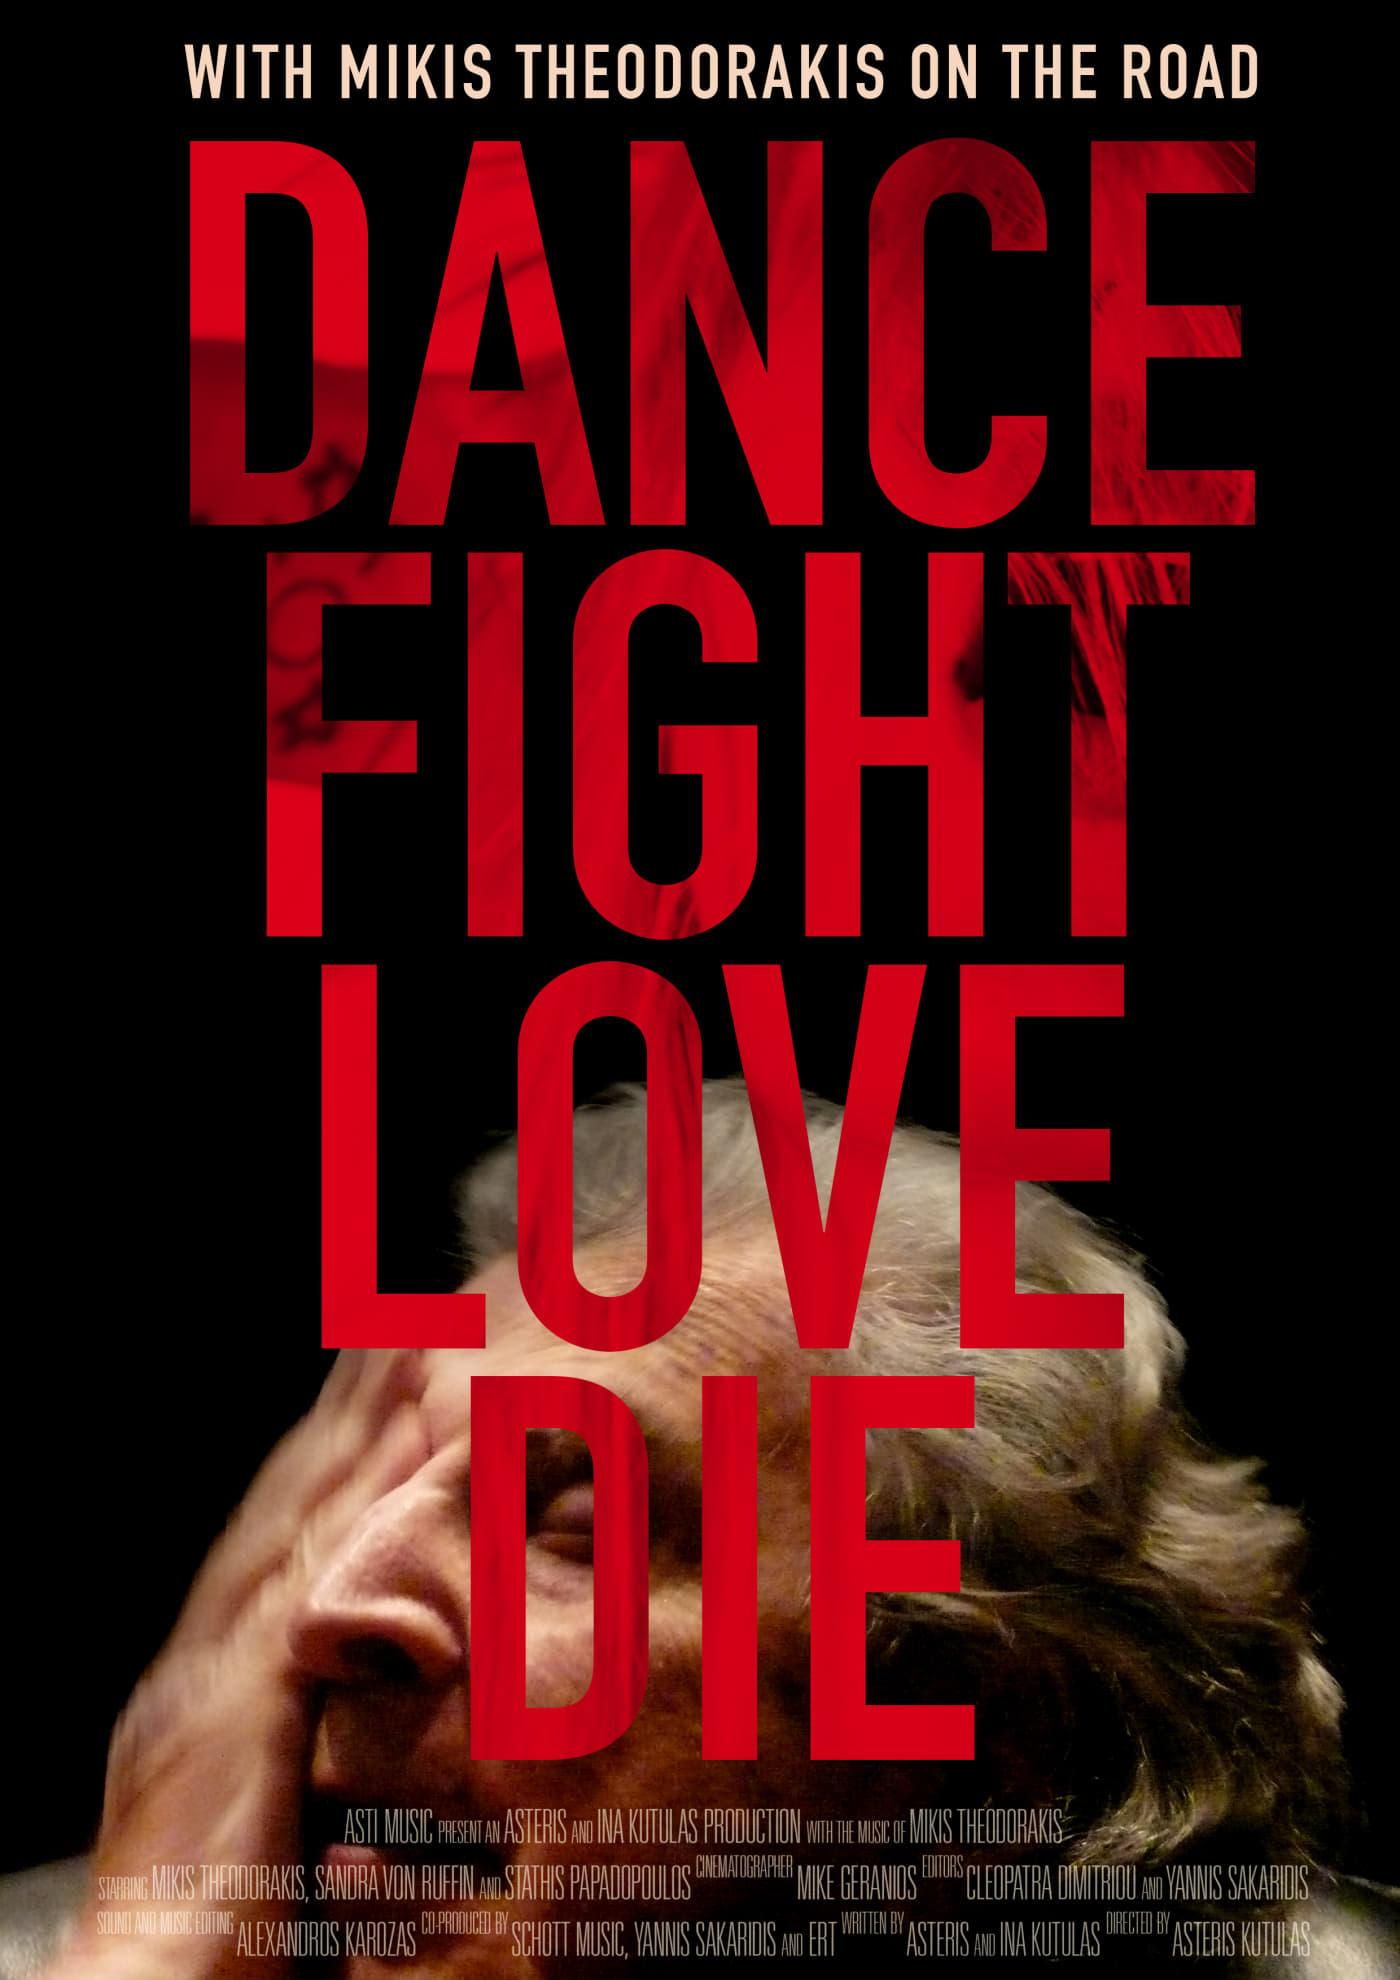 Dance Fight Love Die: With Mikis On the Road poster